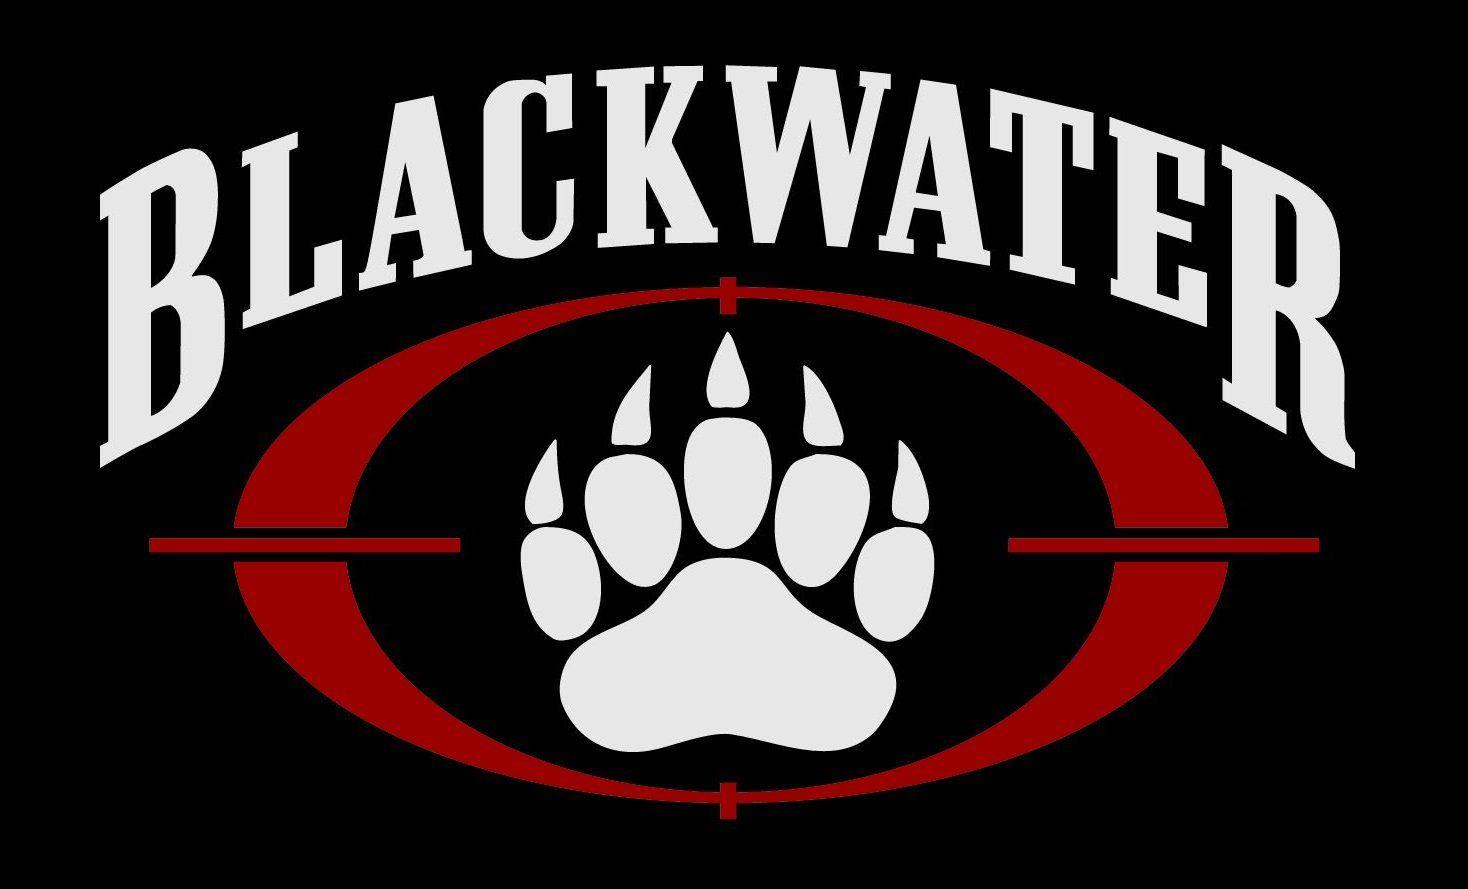 Blackwater Logo - From Murder Conviction to Mistrial in Case of Blackwater Guard's